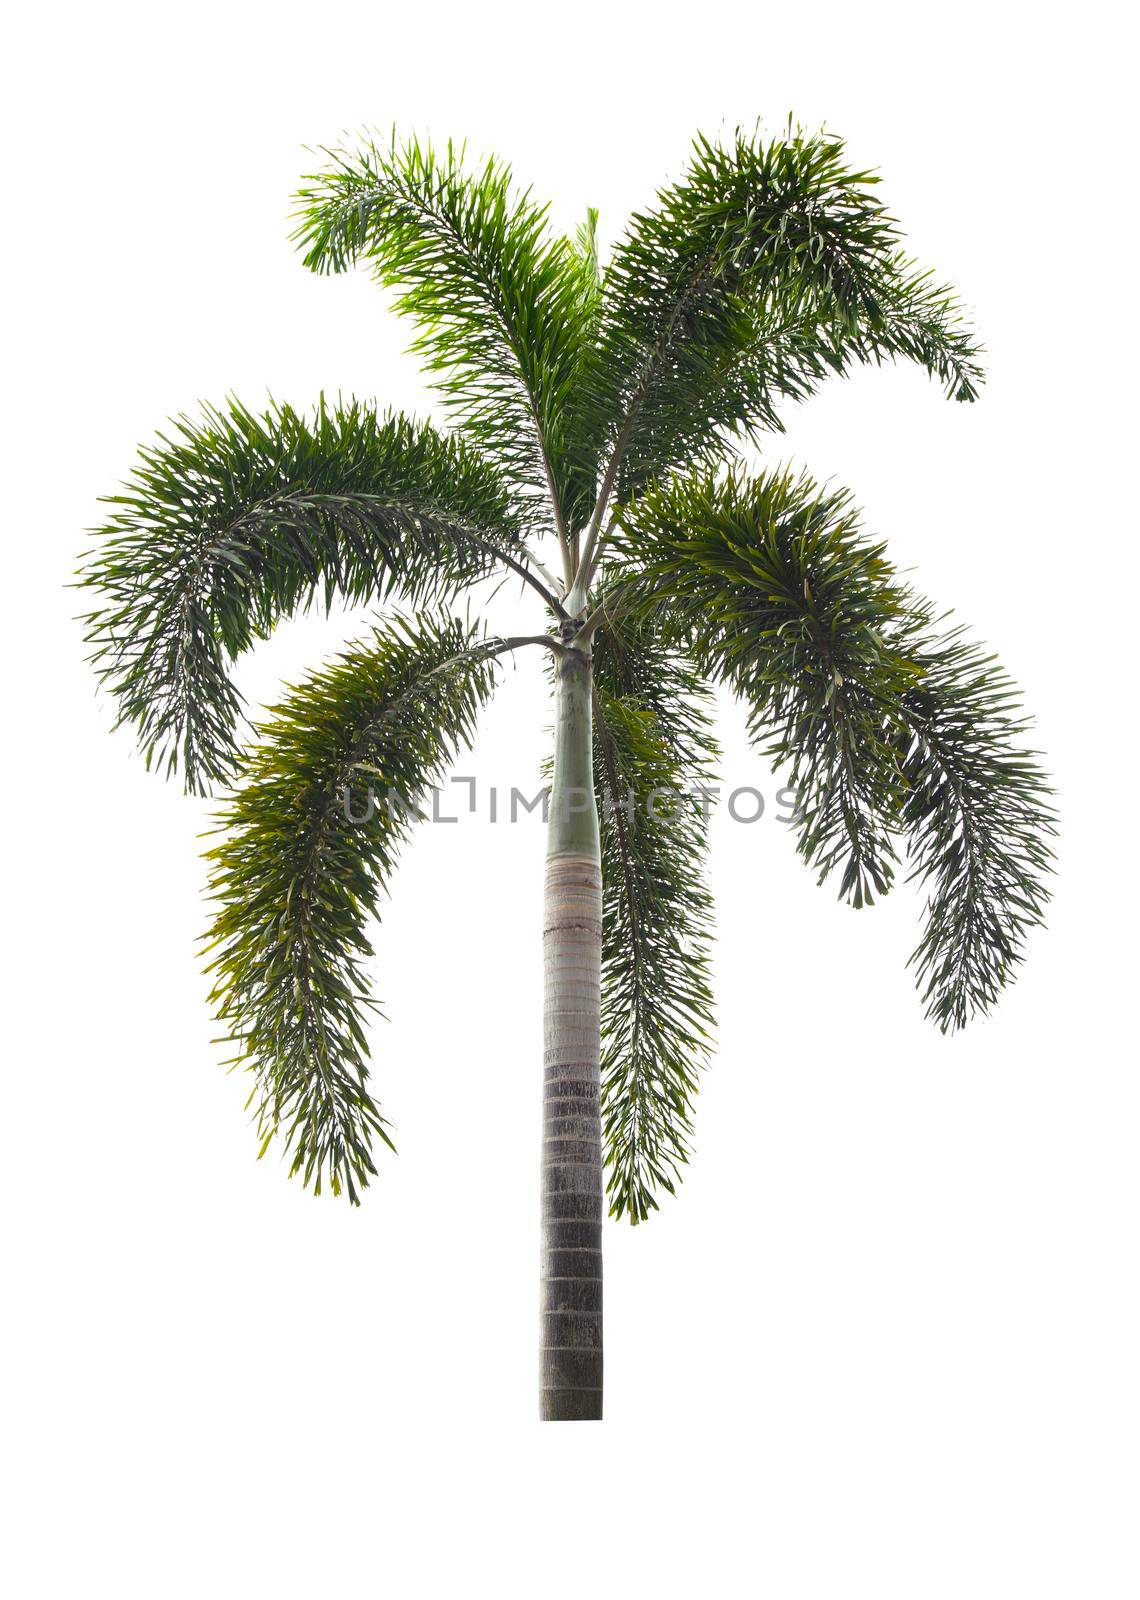 Beautiful green palm tree isolated on white background.